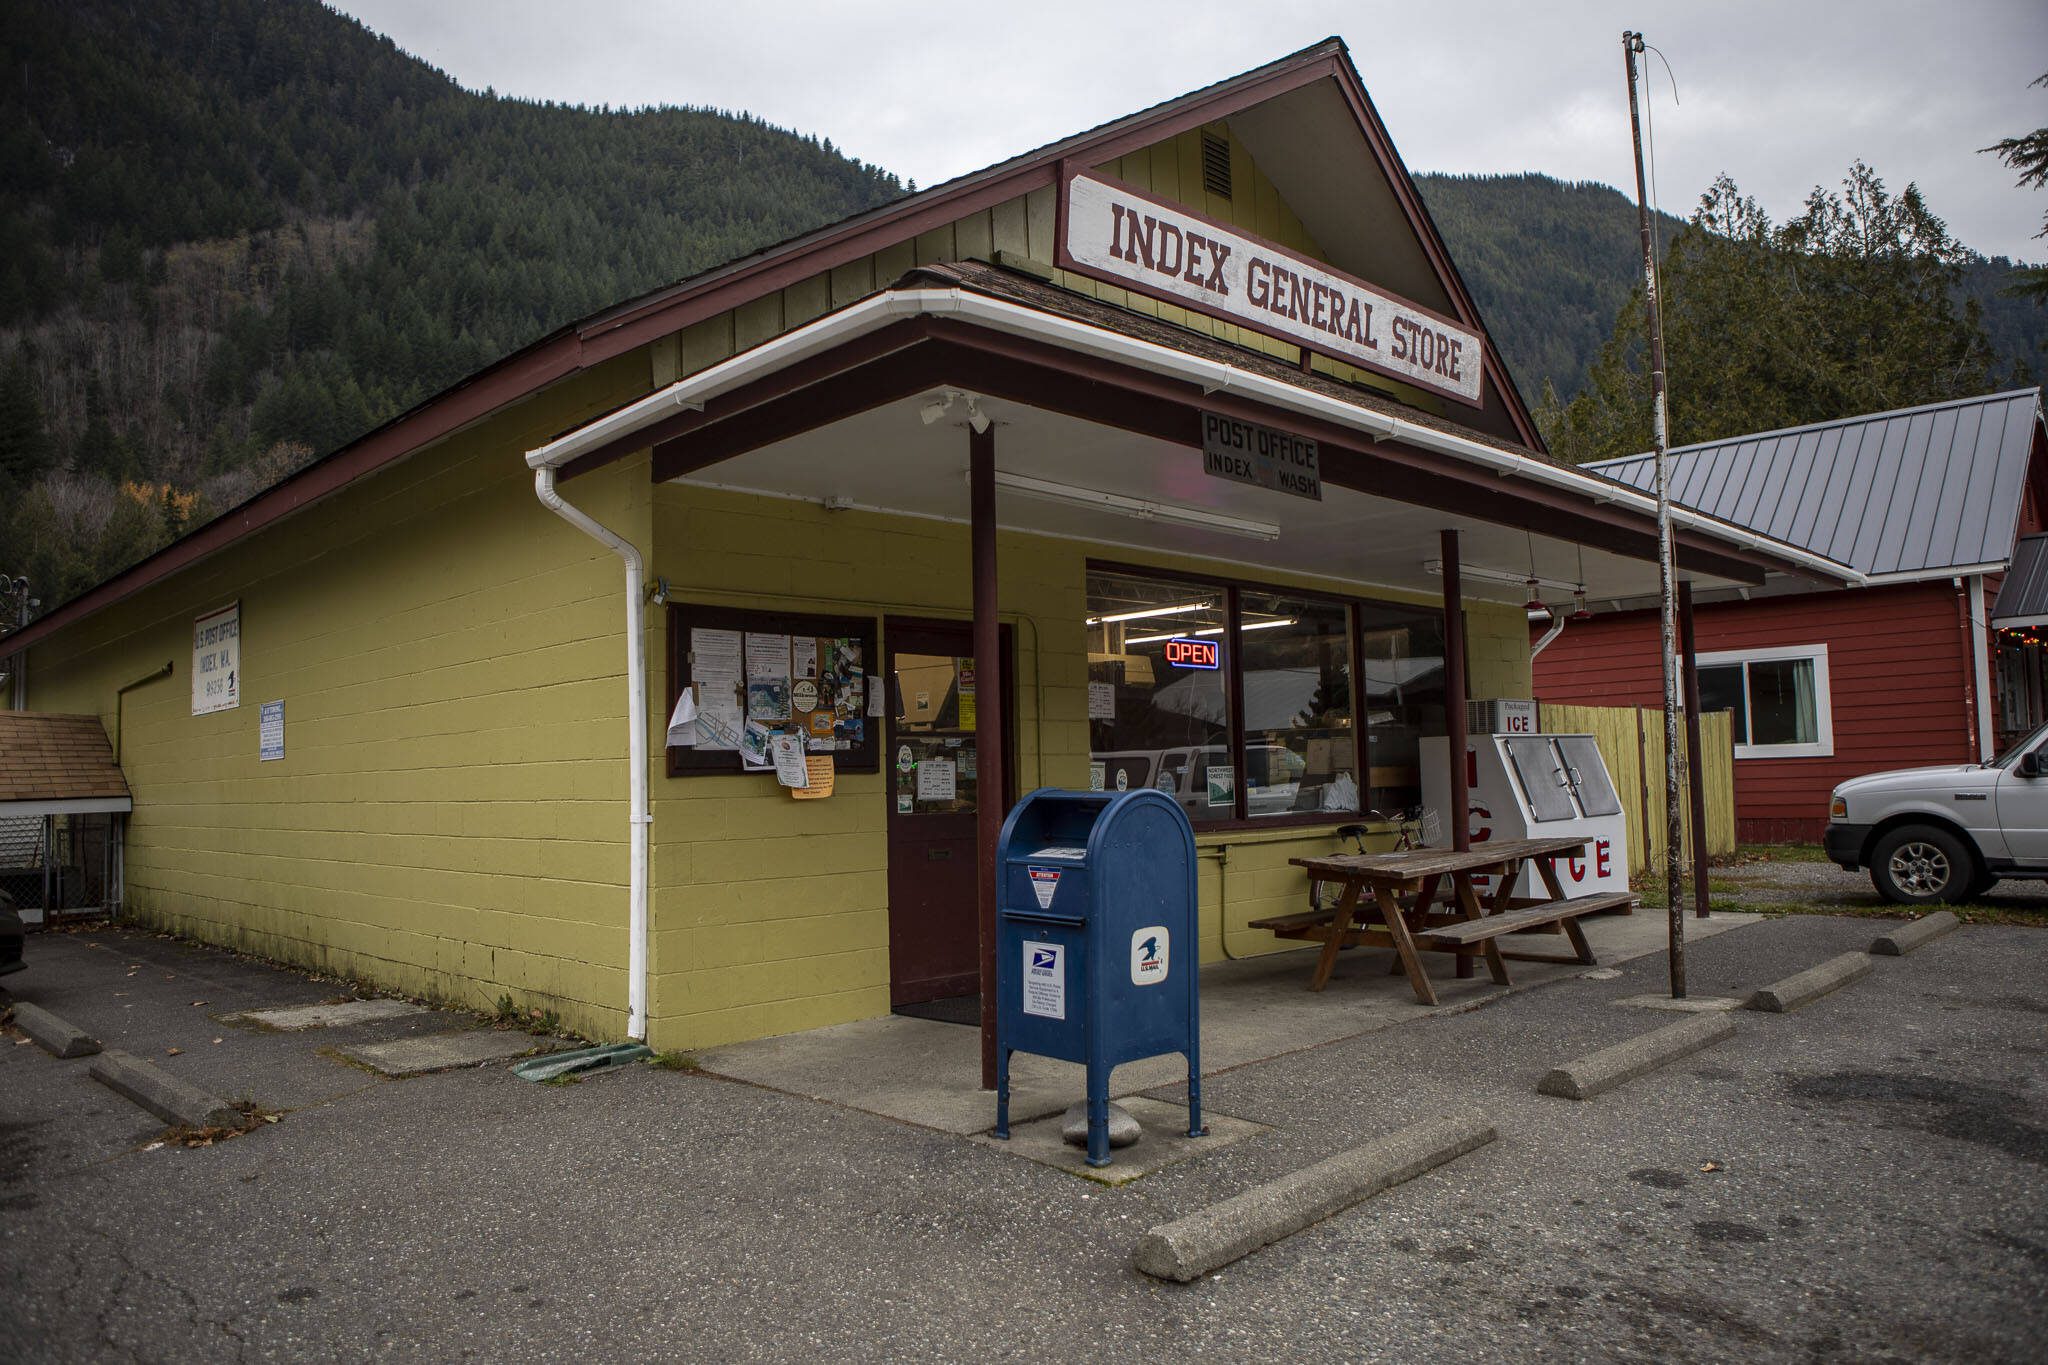 The town post office and general store in Index, Washington on Wedesday, Nov. 29, 2023. (Annie Barker / The Herald)